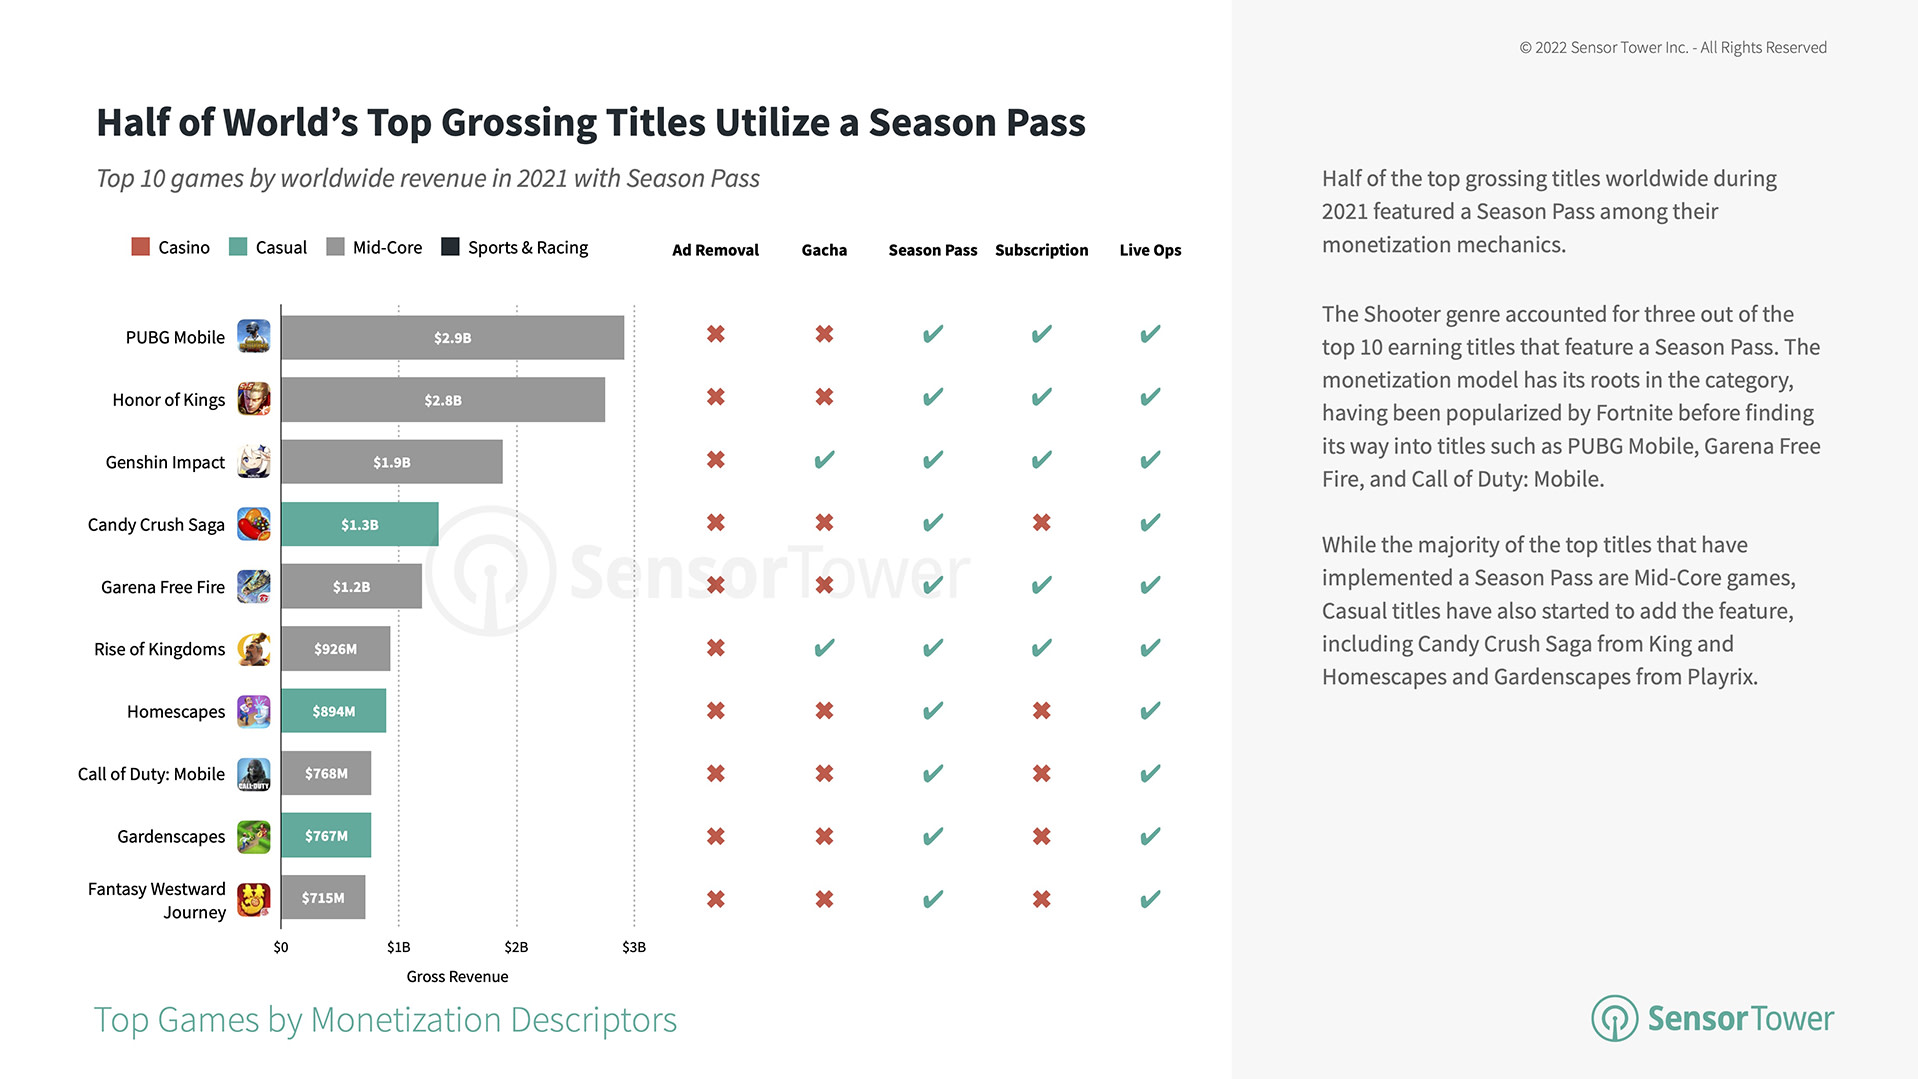 Half of 2021’s Top Grossing Titles Utilized a Season Pass